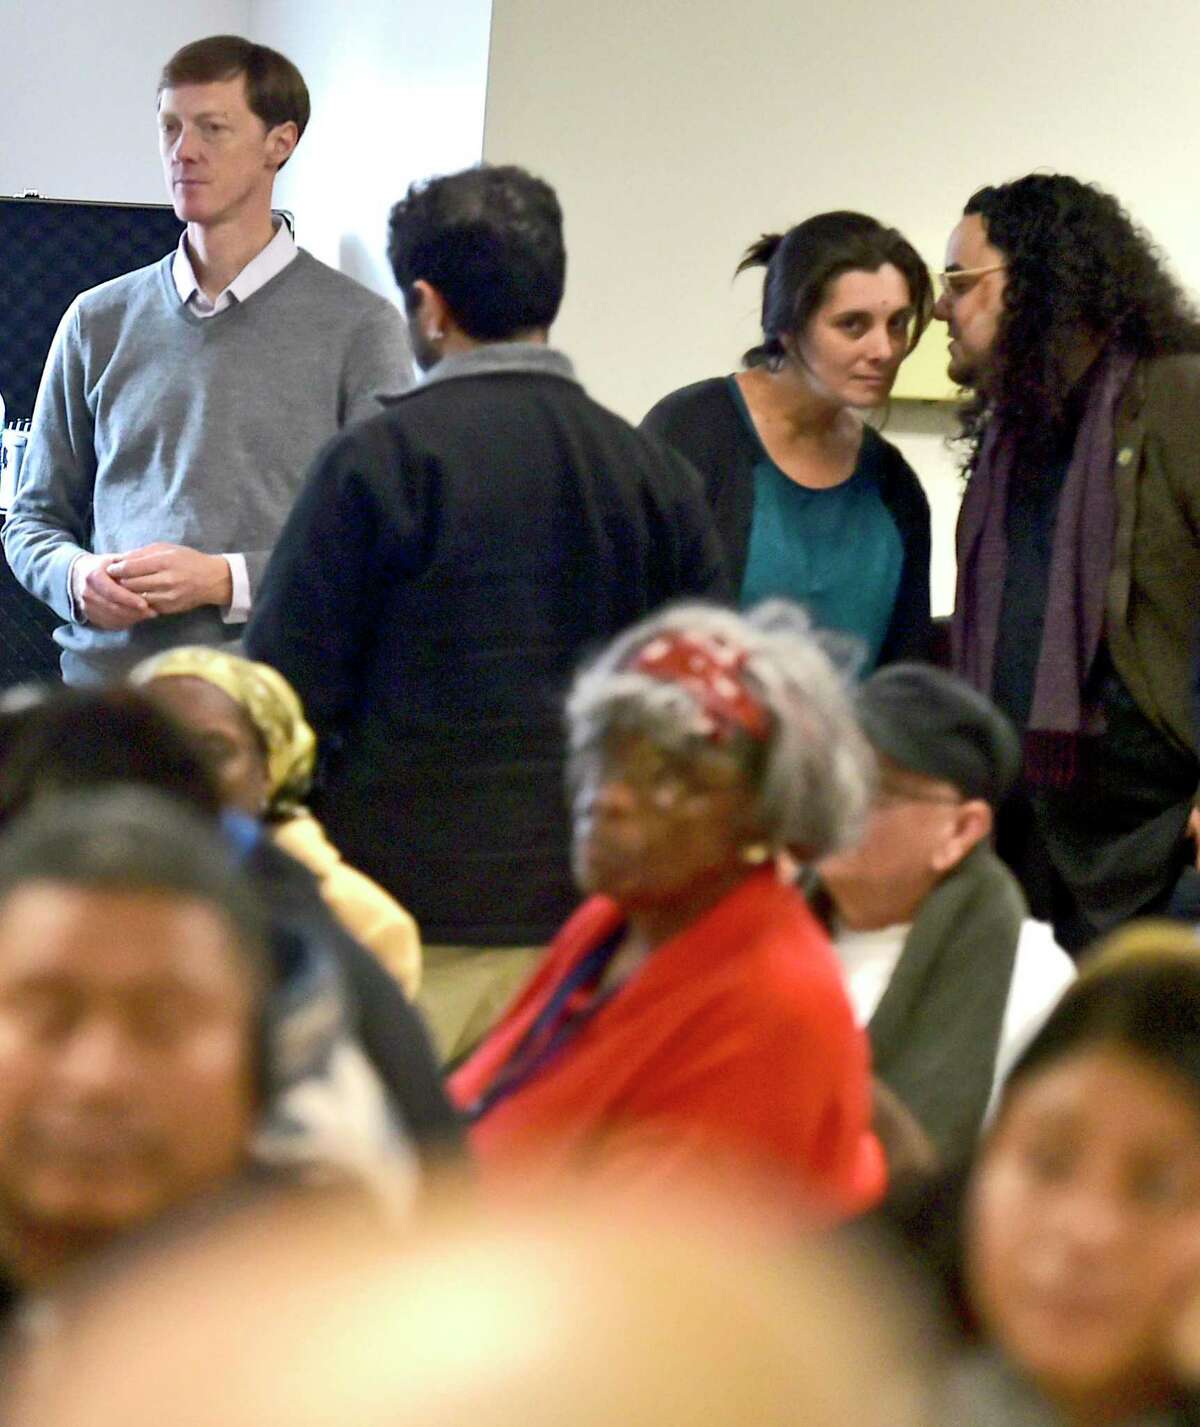 New Haven Mayor-elect Justin Elicker, far left, watches a community meeting for ideas and suggestions on the topics of Economic Development and Education, organized by his transition team, was held Sunday afternoon as the last of a series of meeting held at the High School in the Community in New Haven before Elicker becomes mayor on Jan. 1.